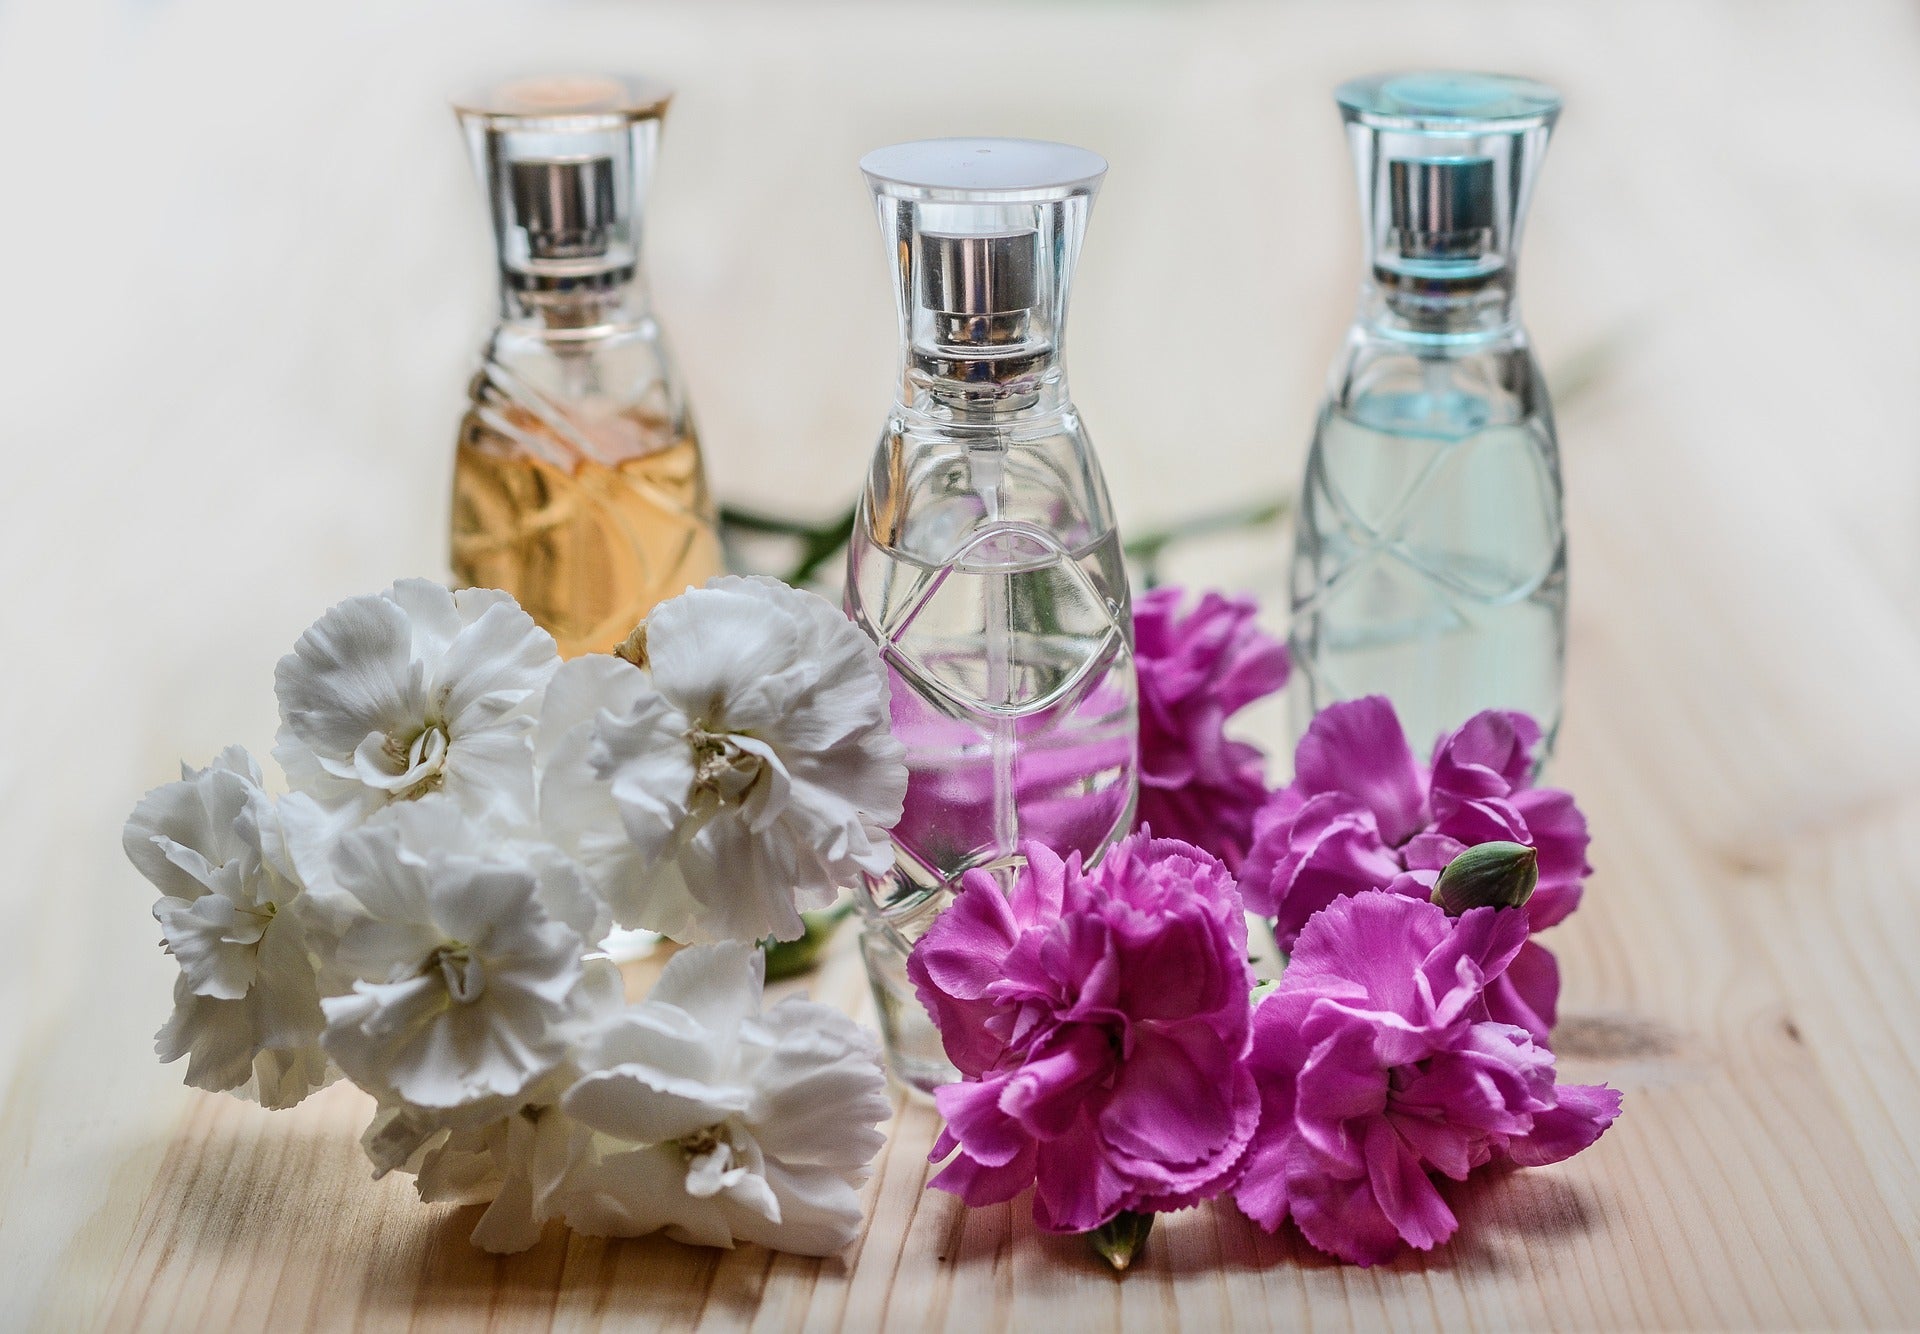 Super Simple DIY: How to Create a Hydrating Facial Mist